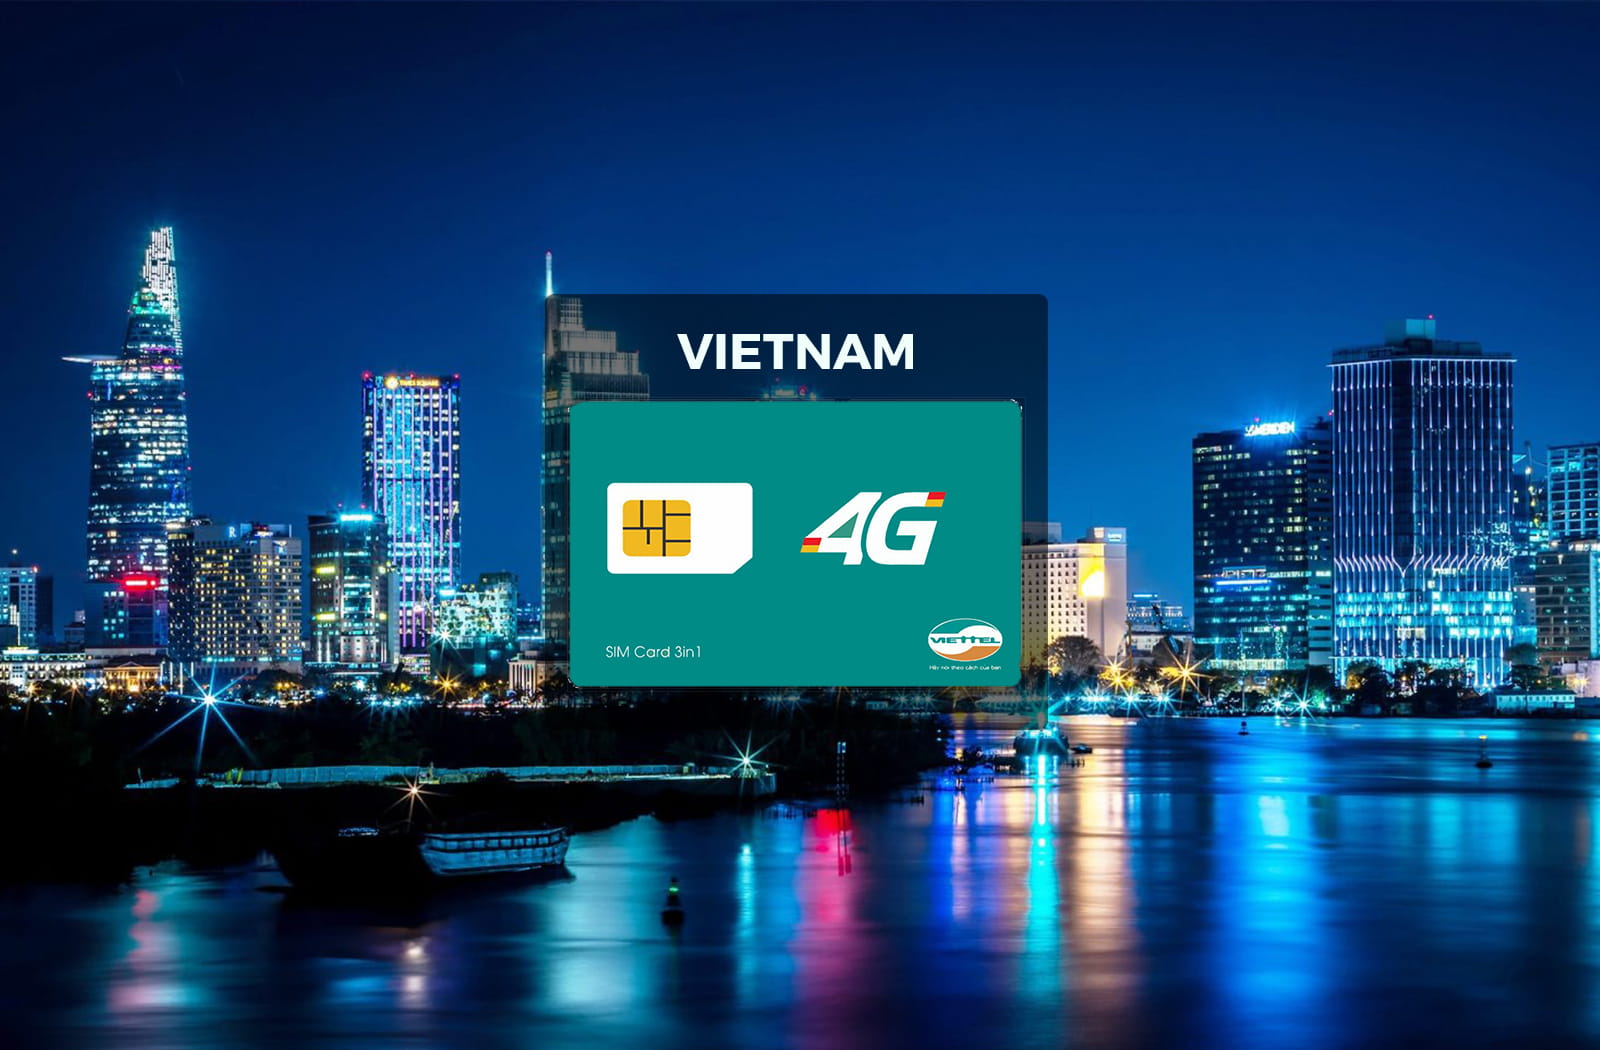 Highlight Vietnam 4G SIM Card Viettel - 28GB Data within 28 days (Tan Son Nhat Airport Pickup OR Hotel Delivery)